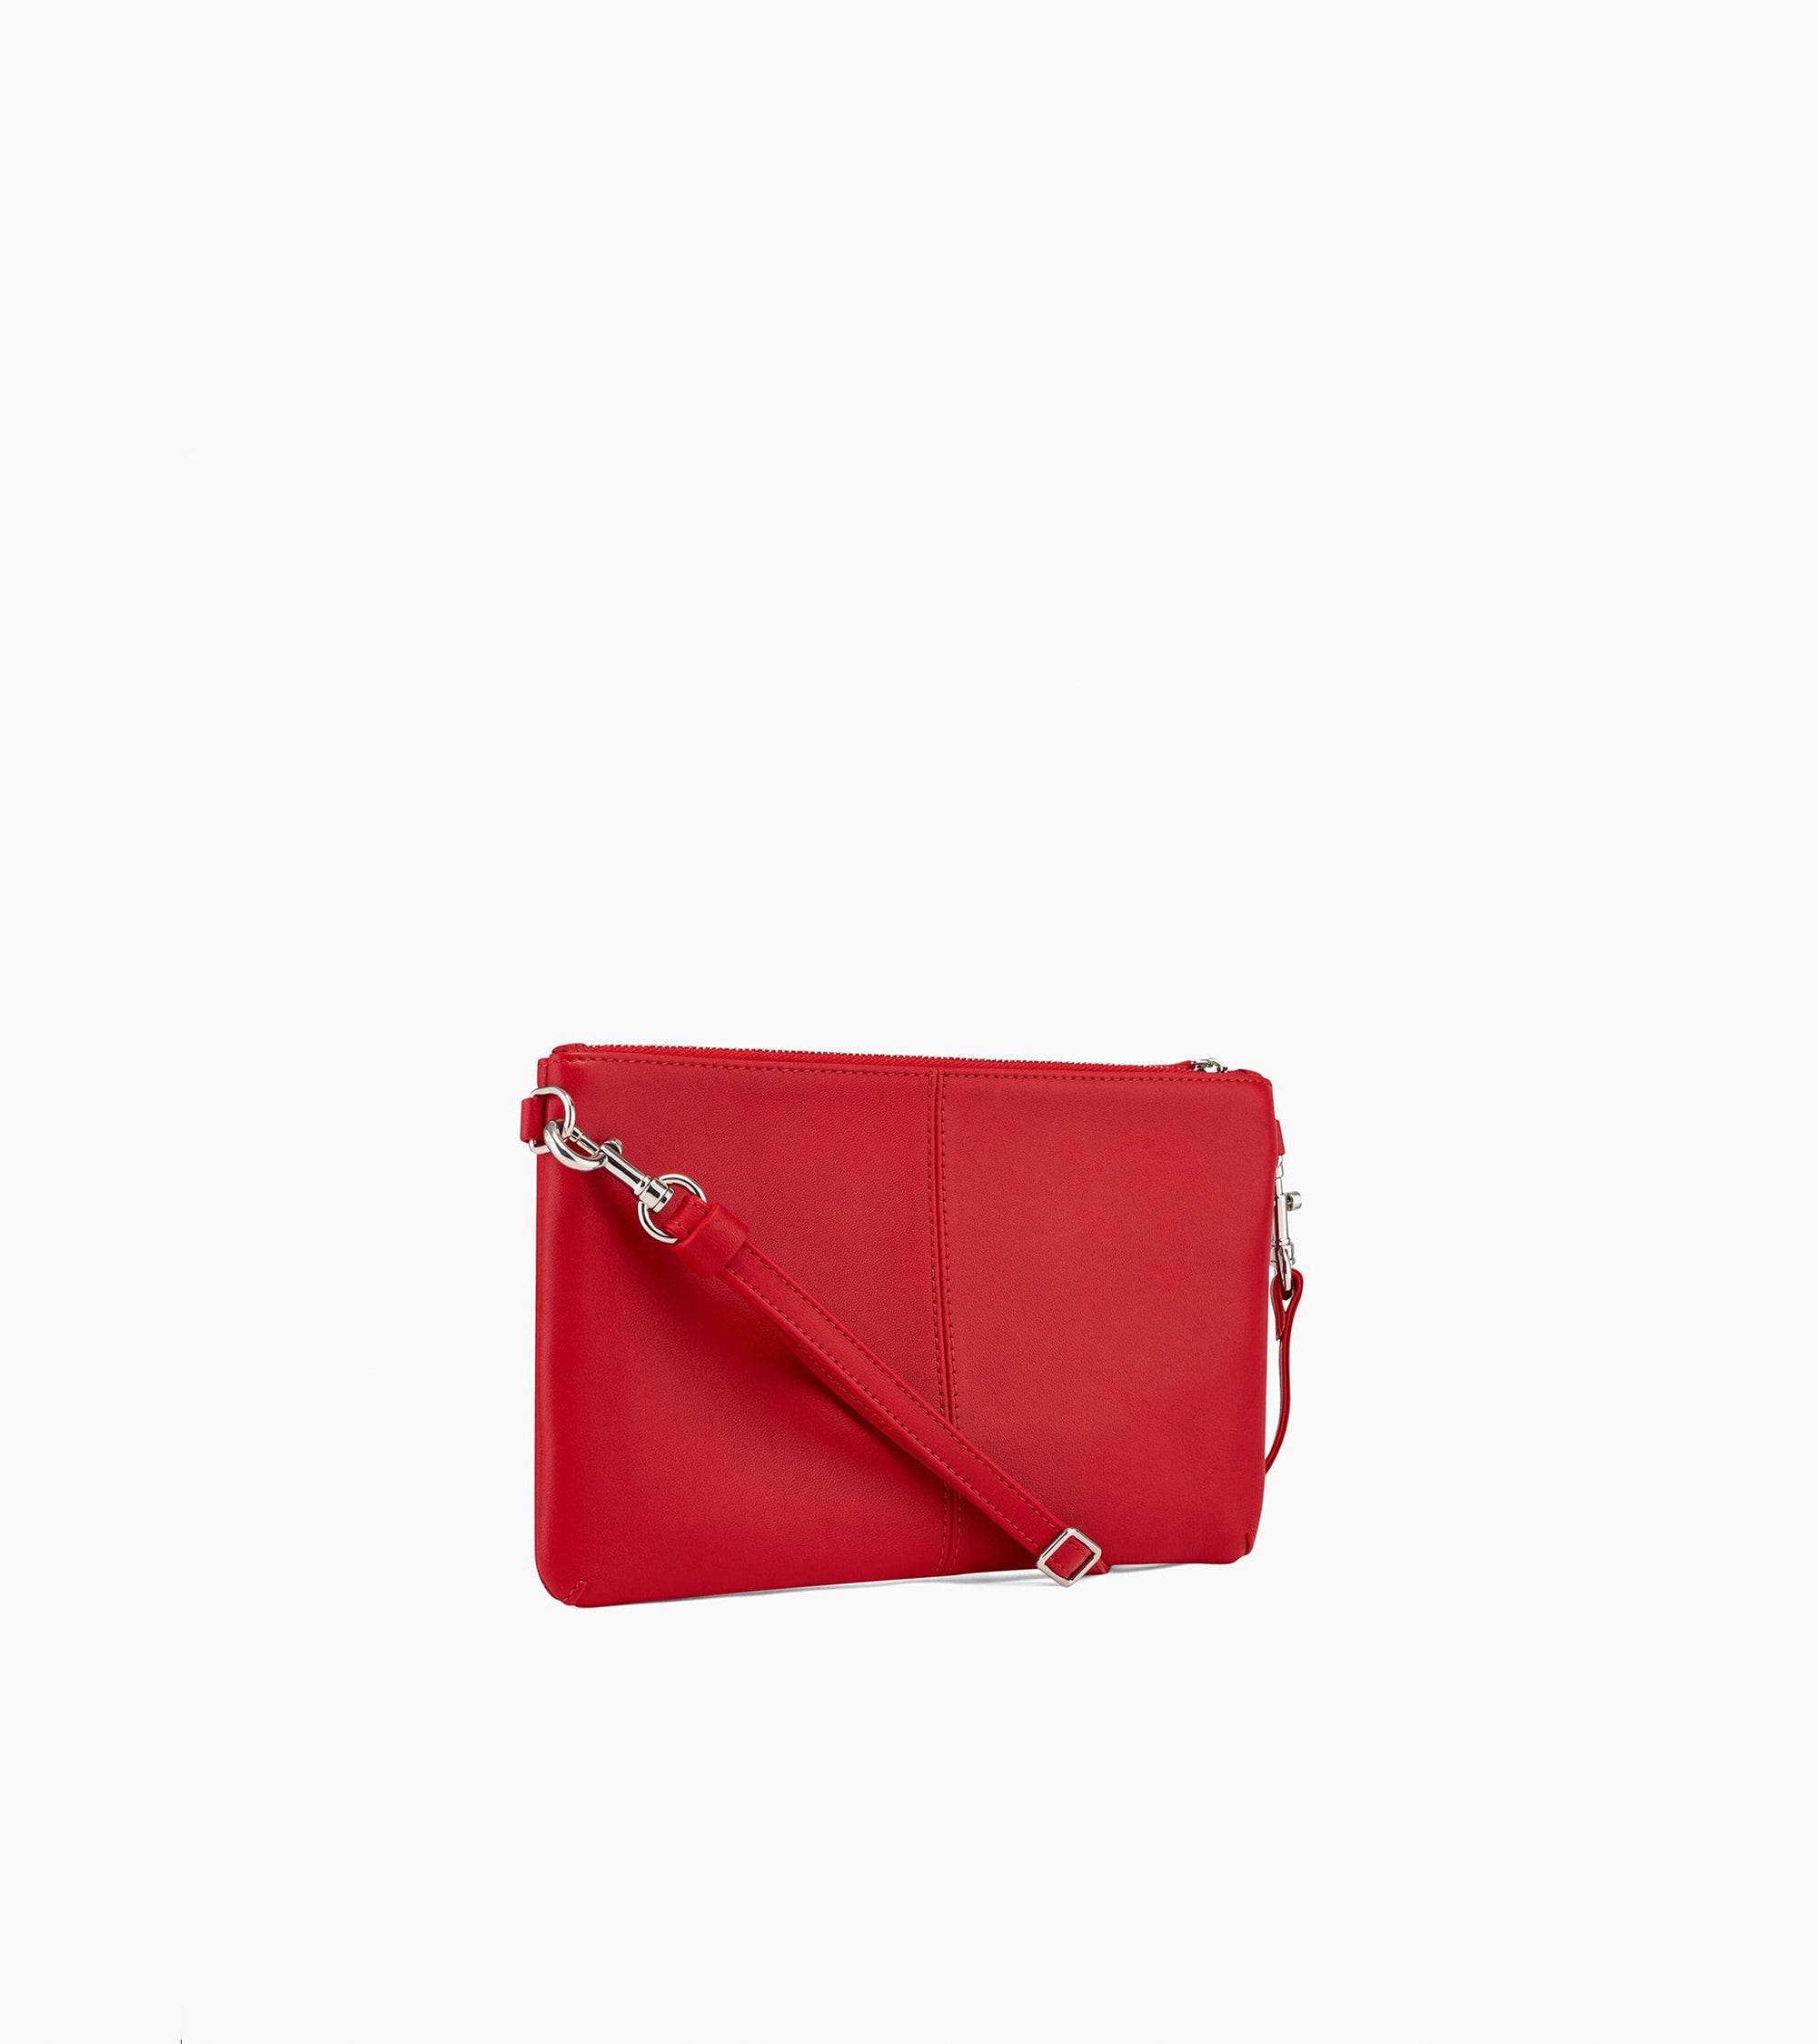 Zipped Charlotte smooth leather pouch with removable strap